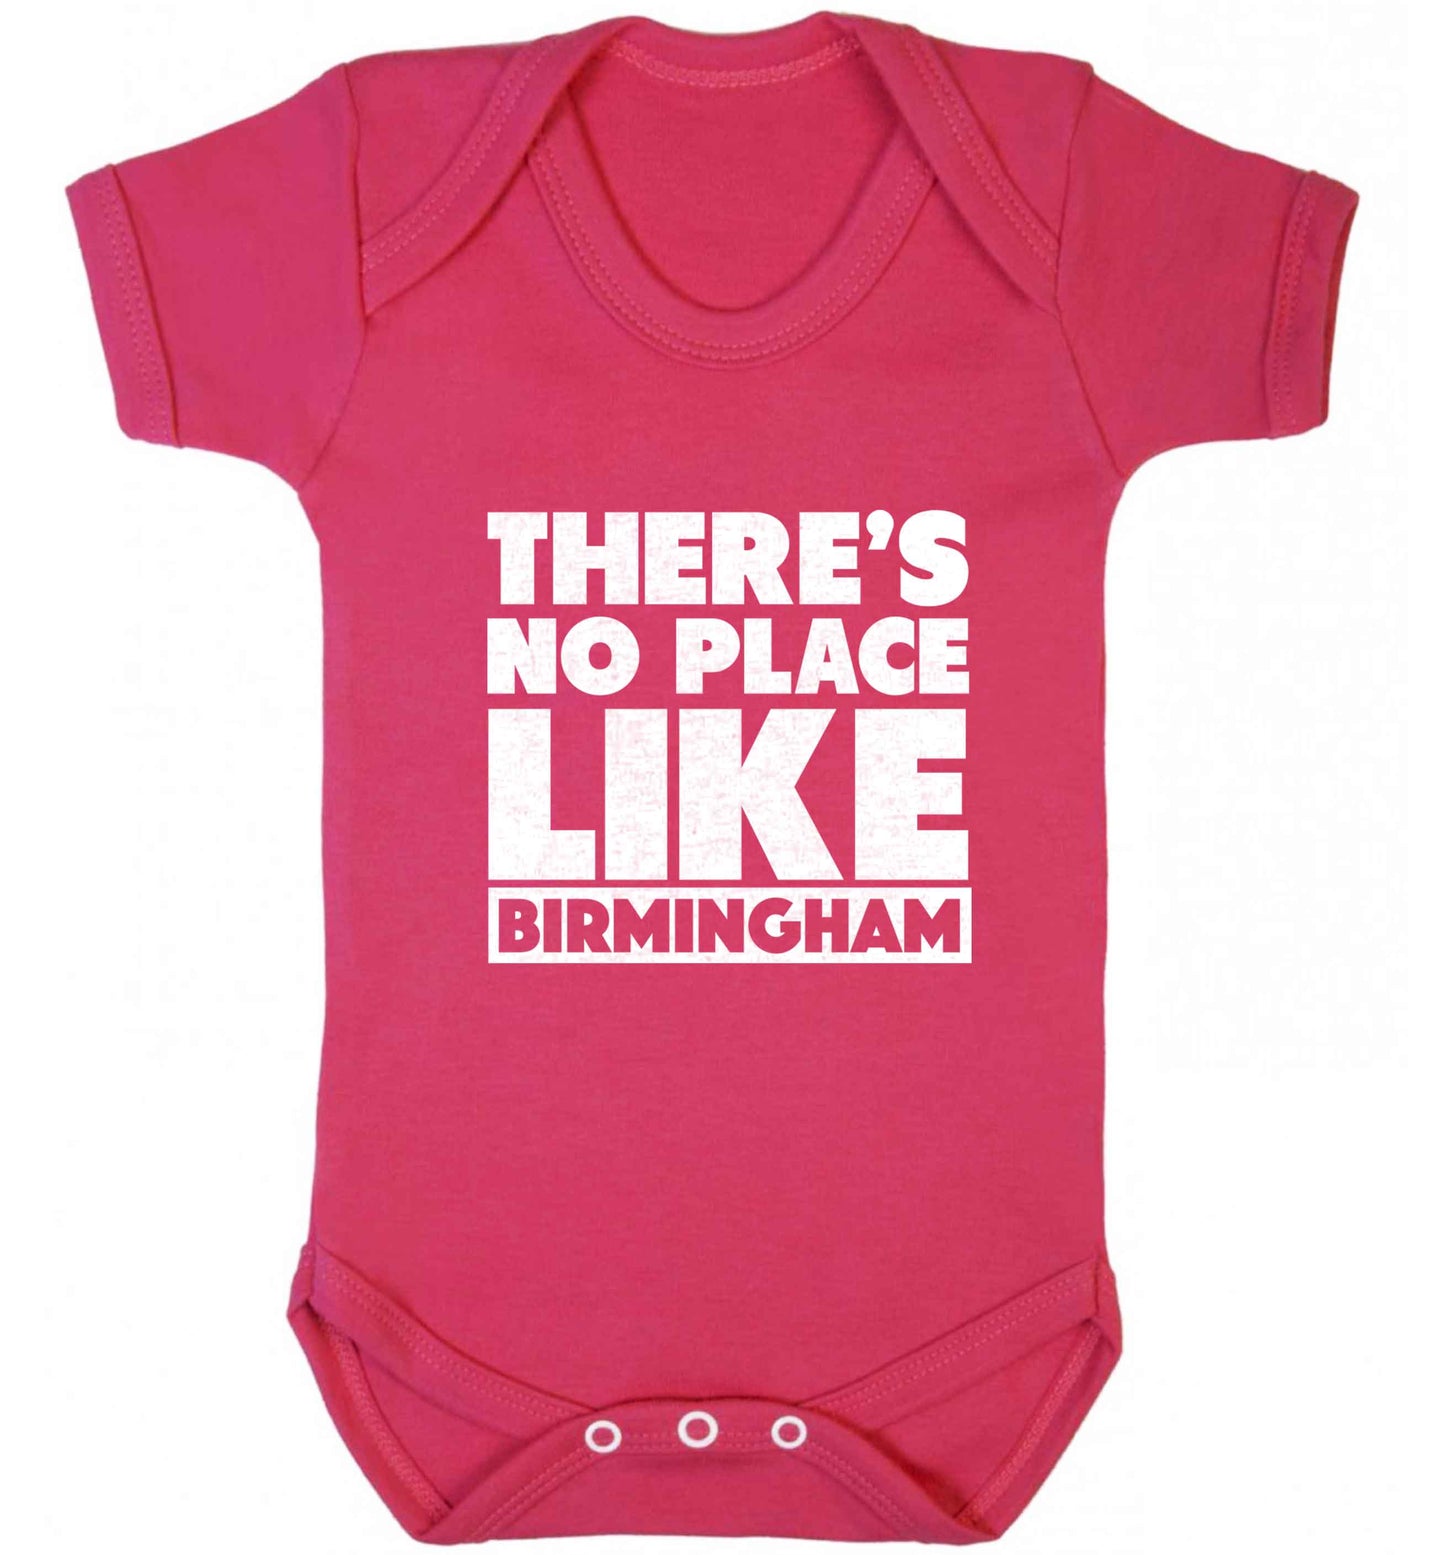 There's no place like Birmingham baby vest dark pink 18-24 months